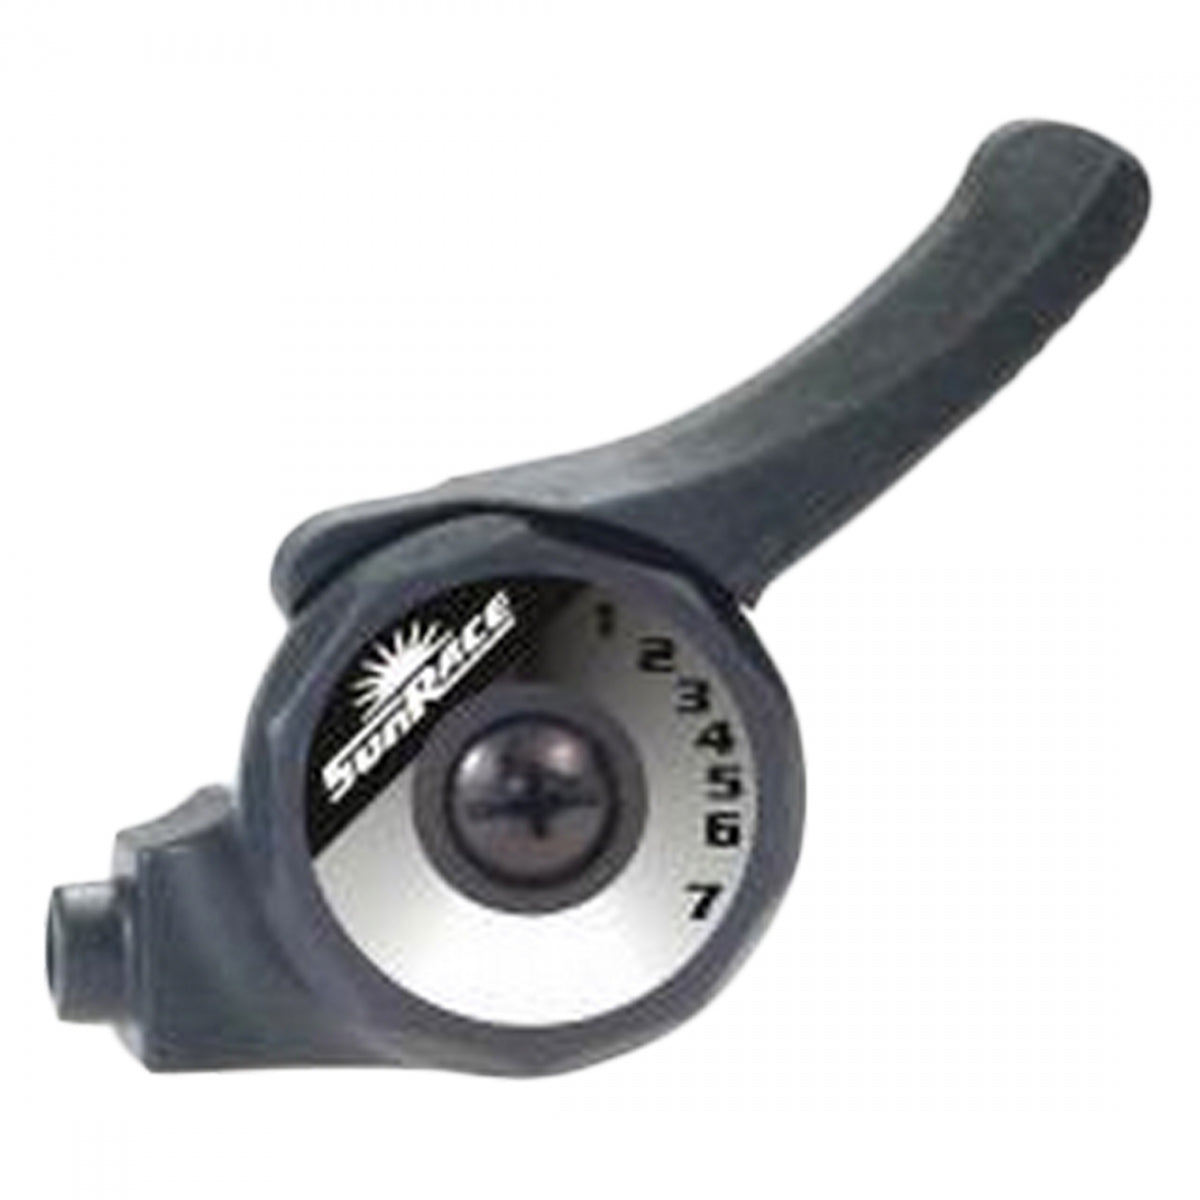 SunRace SL-M2T HB Thumb Shifter, 7-Speed, Right-Hand